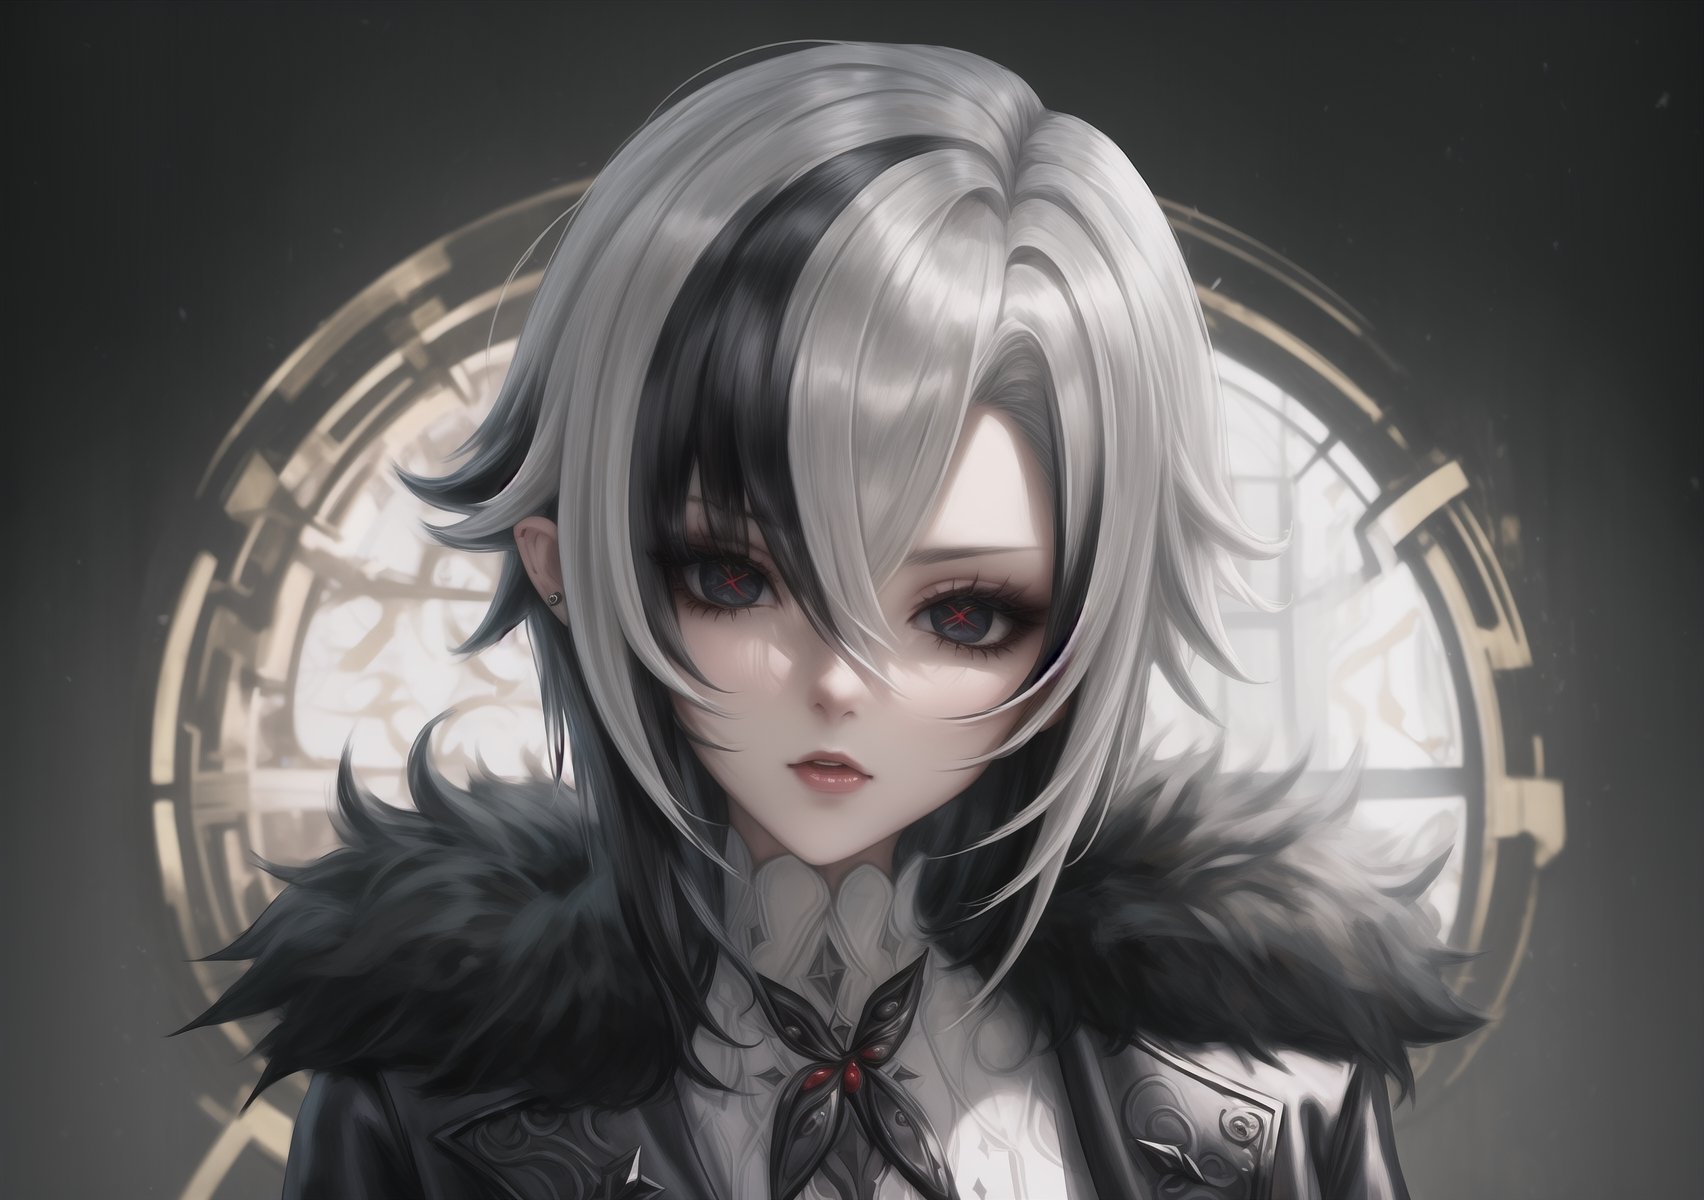 1 girl, black_eyes, coat, piercing_ears, fur coat, clipped feet, gloves, hair_between_eyes, high resolution, multicolored_hair, red_pupils, short_hair, side bangs, solo, highlighted_hair, two_tone_hair, white_gloves, white_hair, x-shaped_pupils, black_hair, blurred , brooch, cloak, dark_background, depth_of_field, fur-trimmed coat, fur trim, hair_between_eyes, high-res, jewelry, looking_at_viewer, multicolored_hair, portrait, red_eyes, shorthair, solo, streaked_hair, symbol_pupils, two-tone_hair, white_coat, white_hair, x-shaped_pupils,arlecchino(genshin impact)